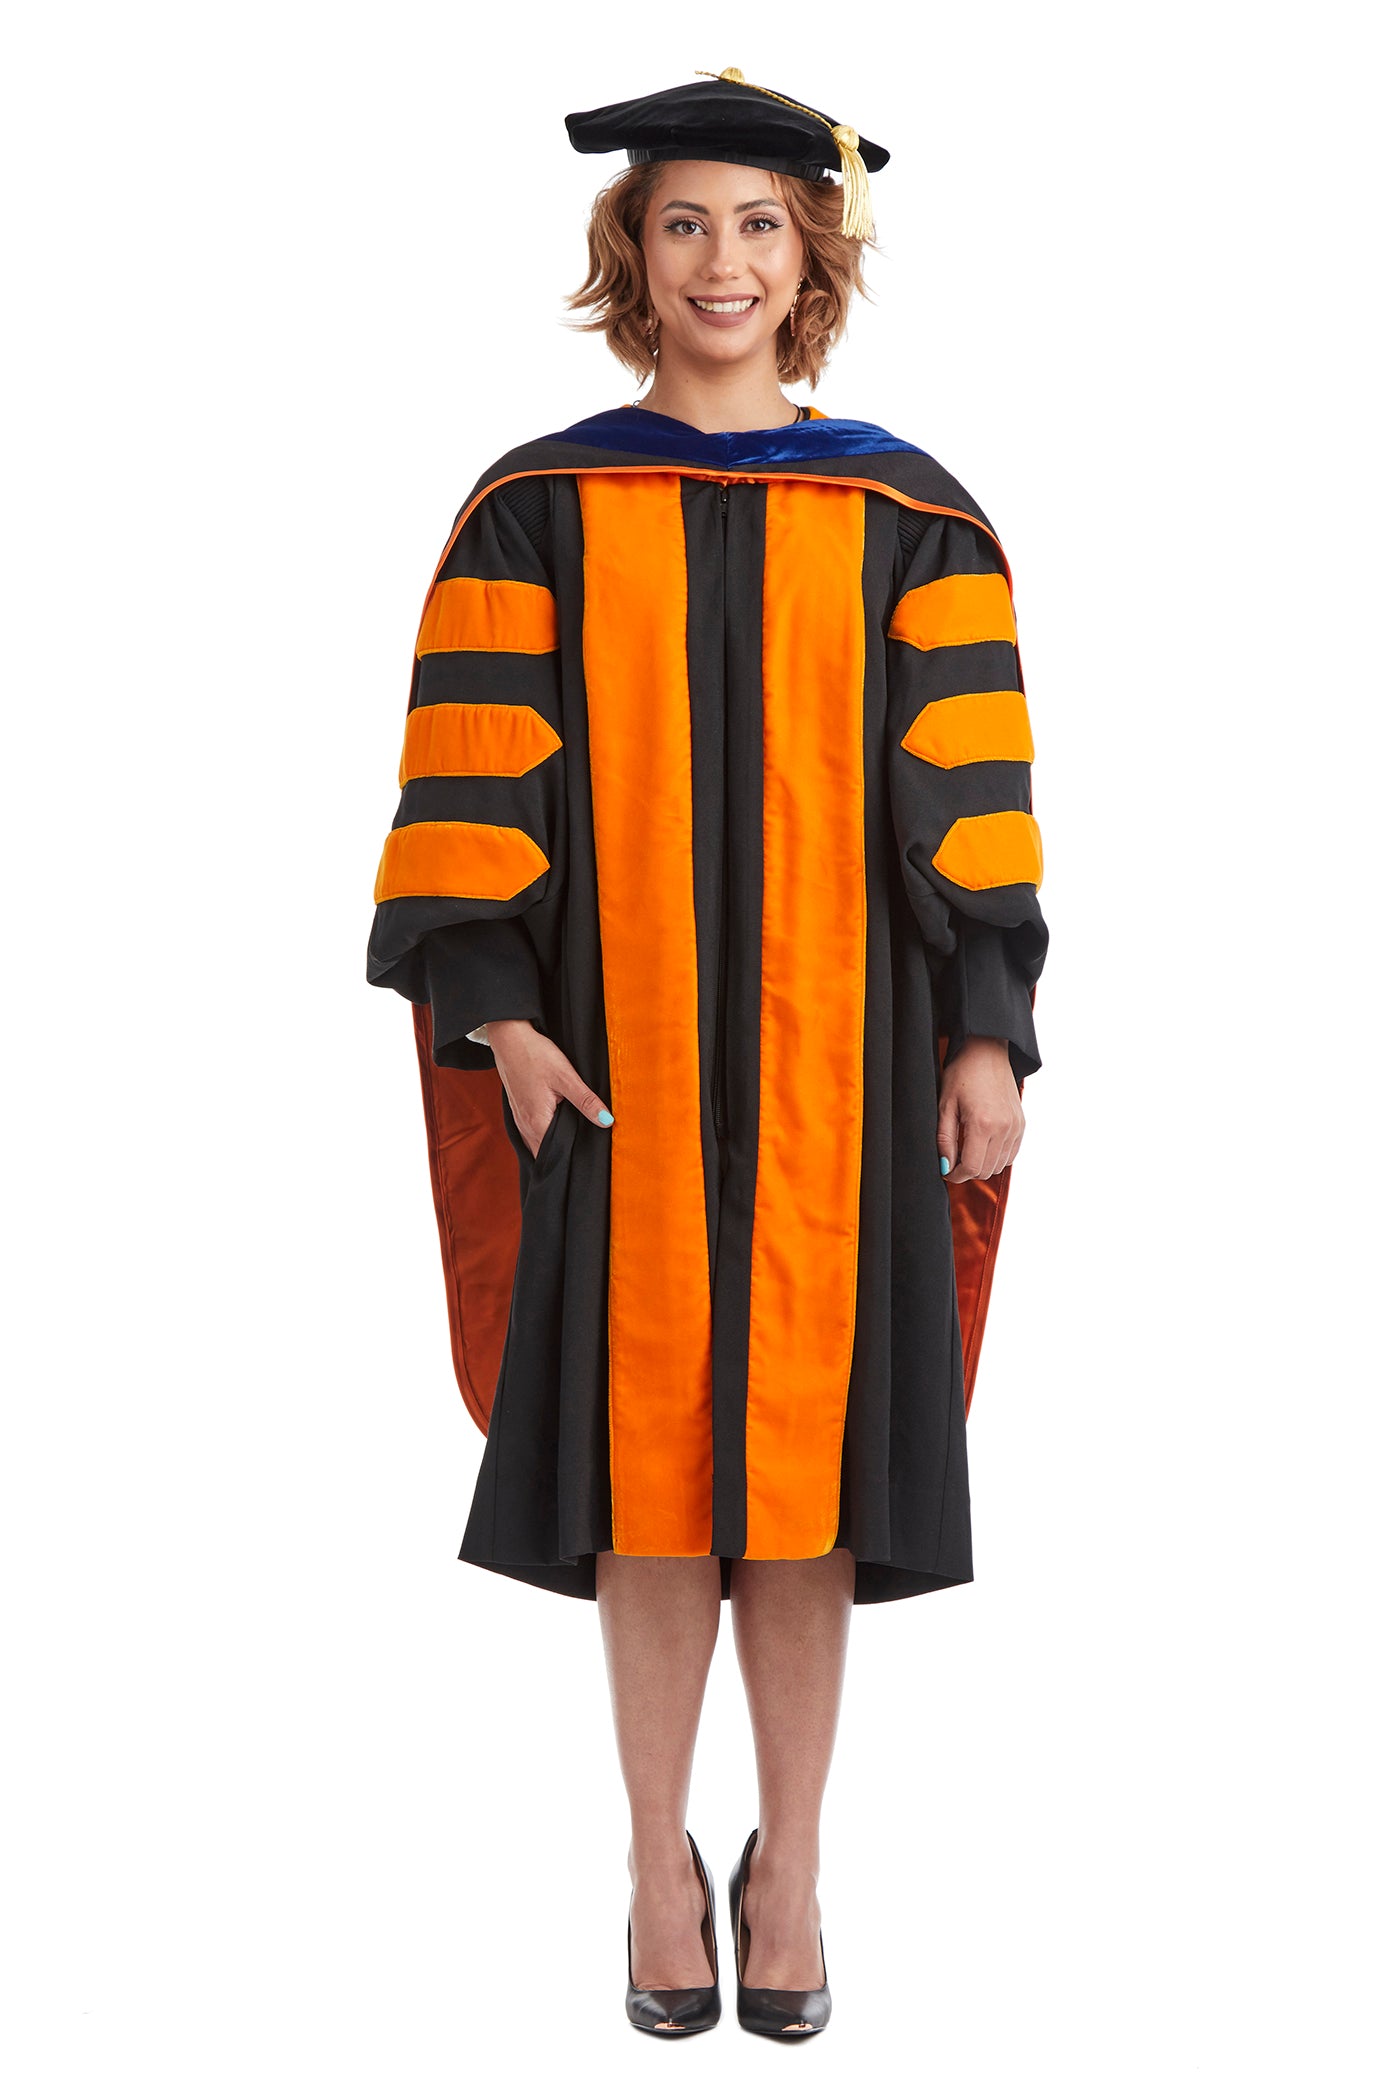 Princeton Commencement Doctoral Regalia - PhD Gowns, Hoods, & Tams ...